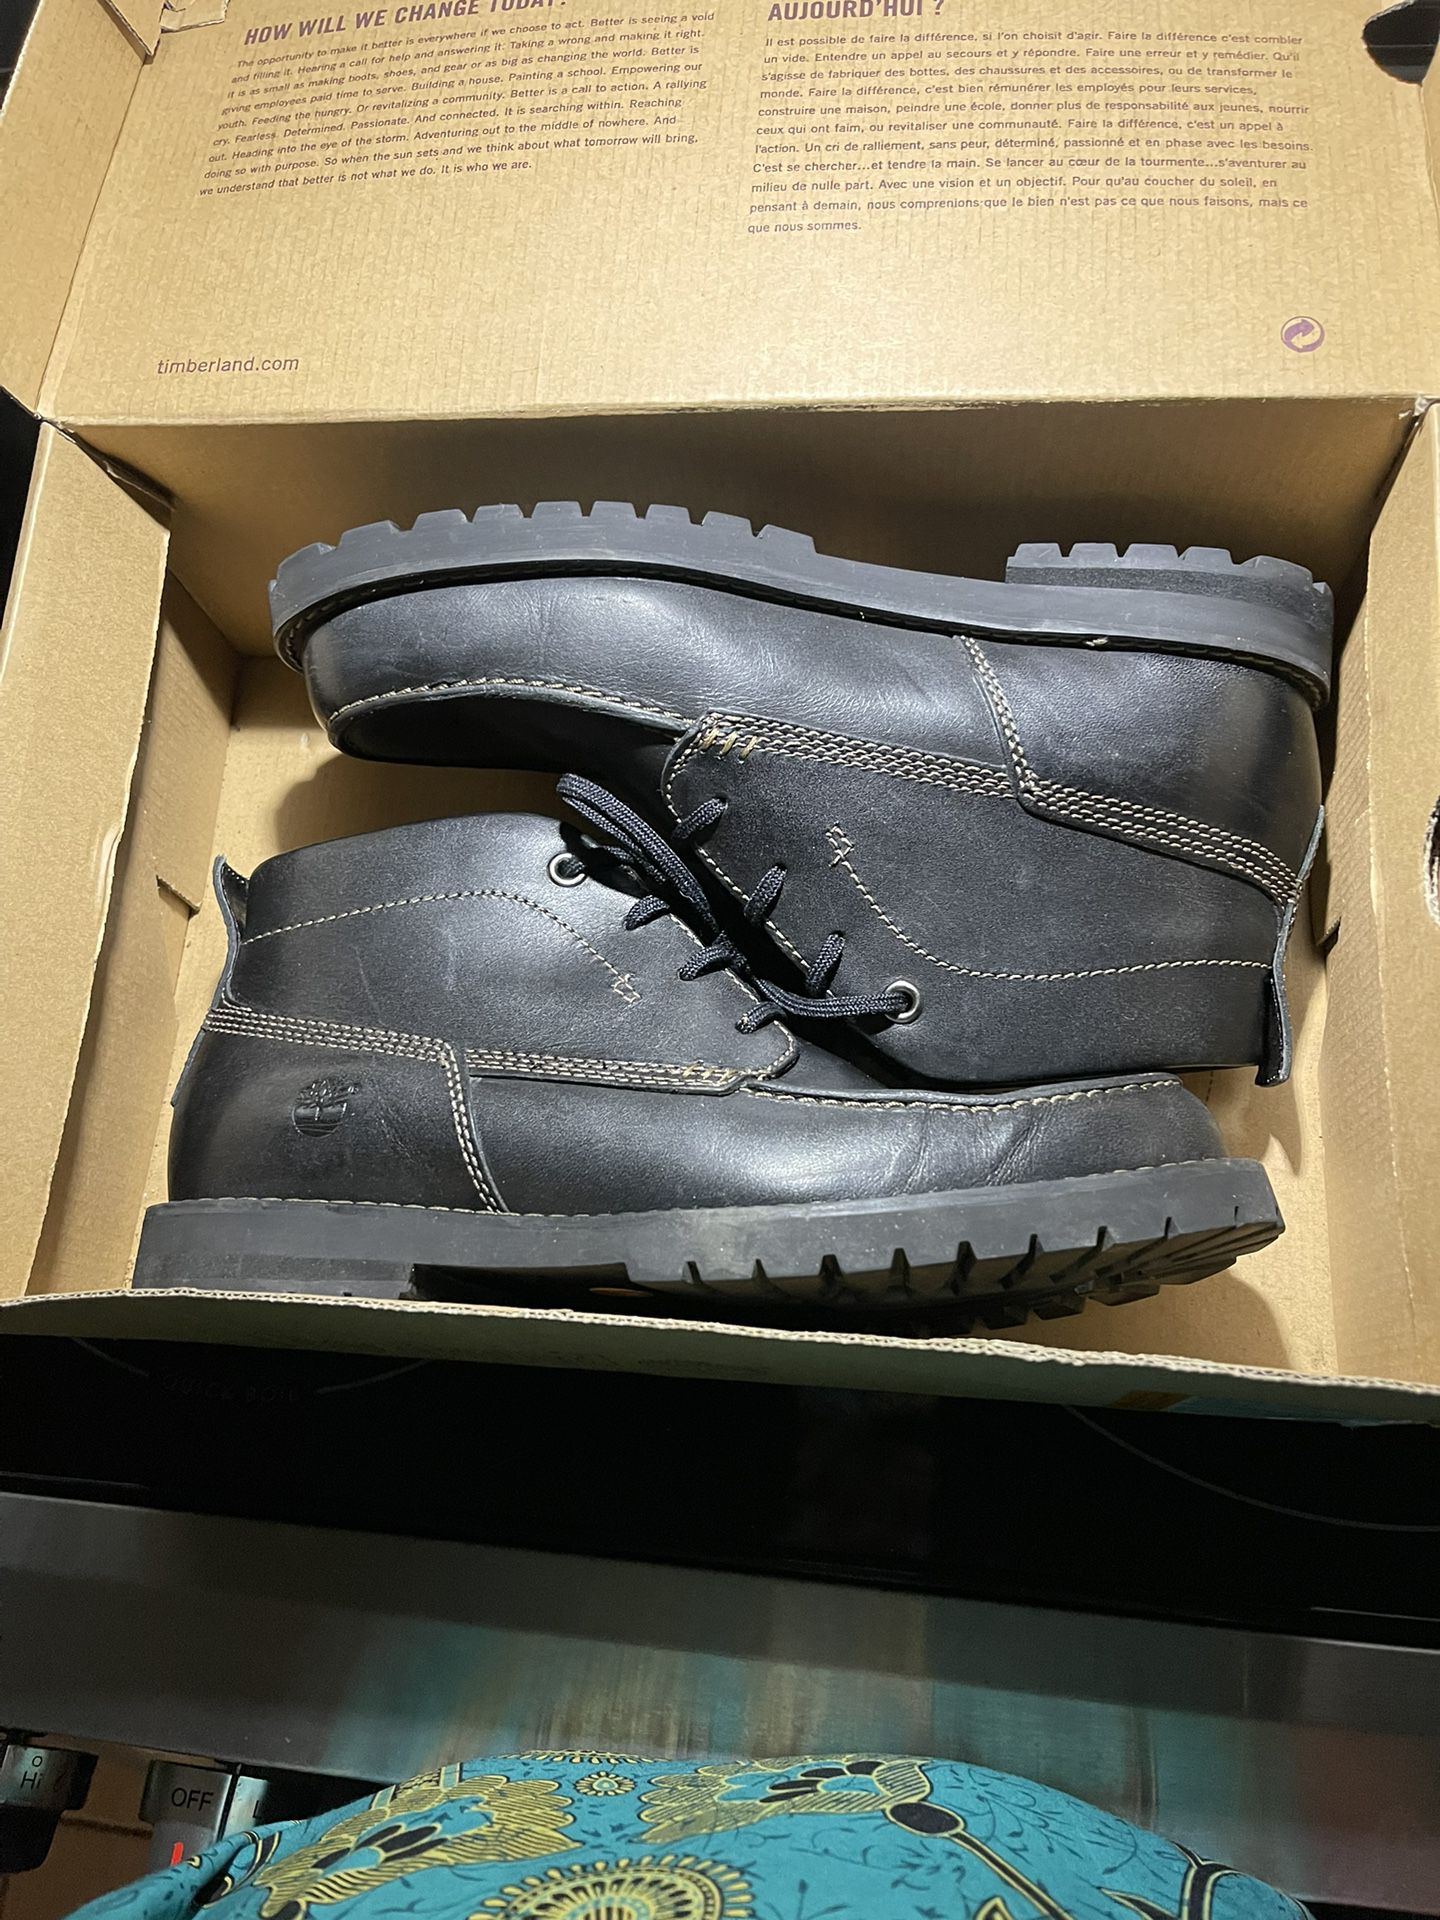 New In Box Timberland Boots 8.5